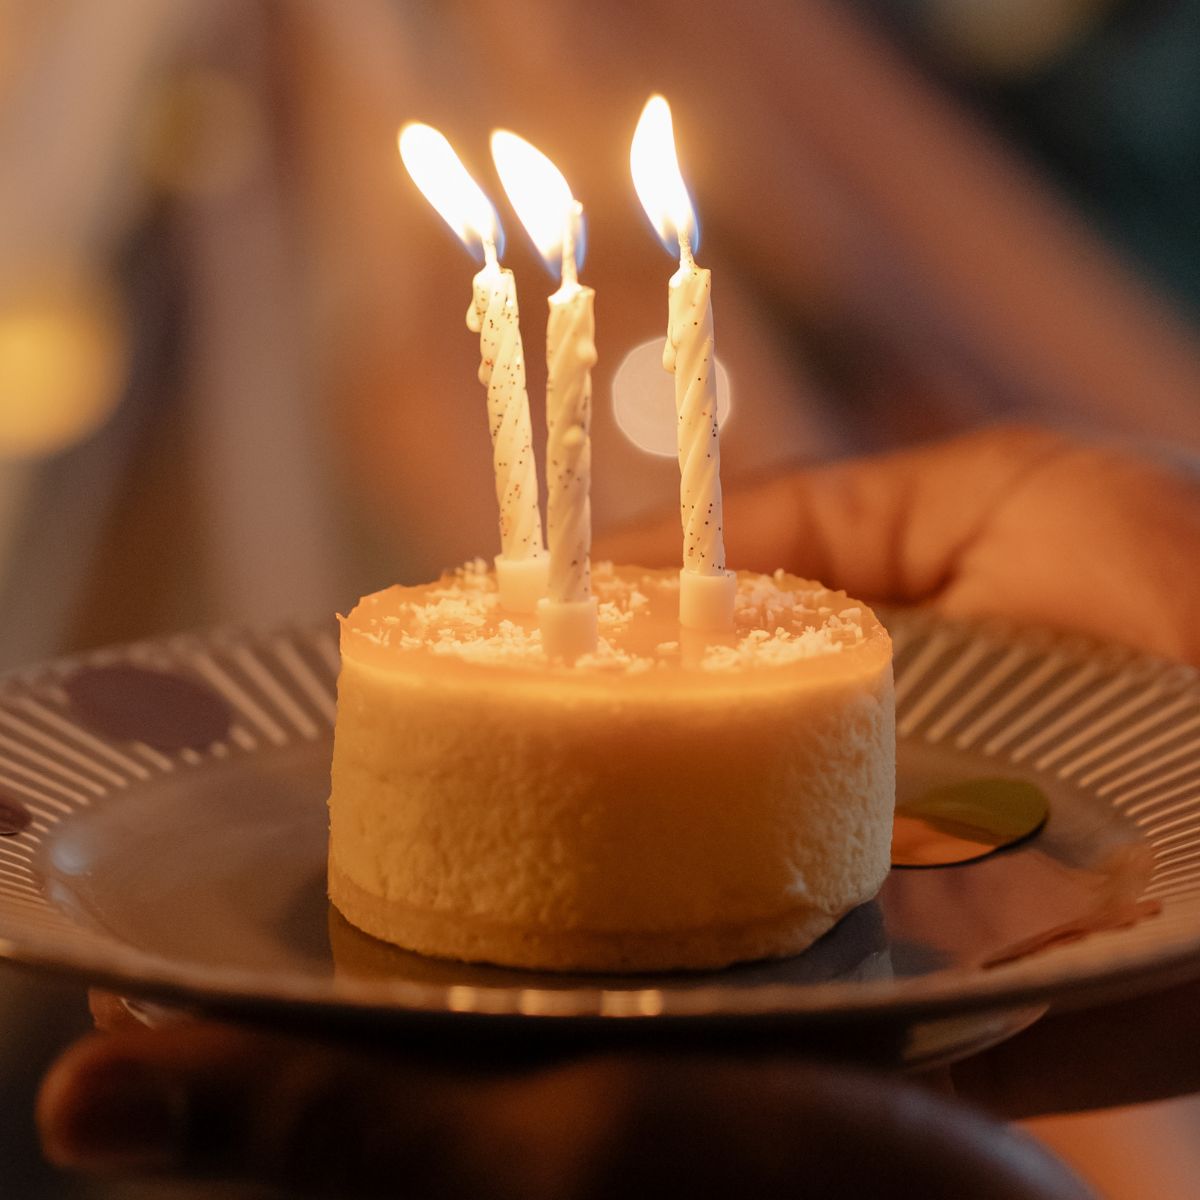 Mini dessert cake with candles on a plate